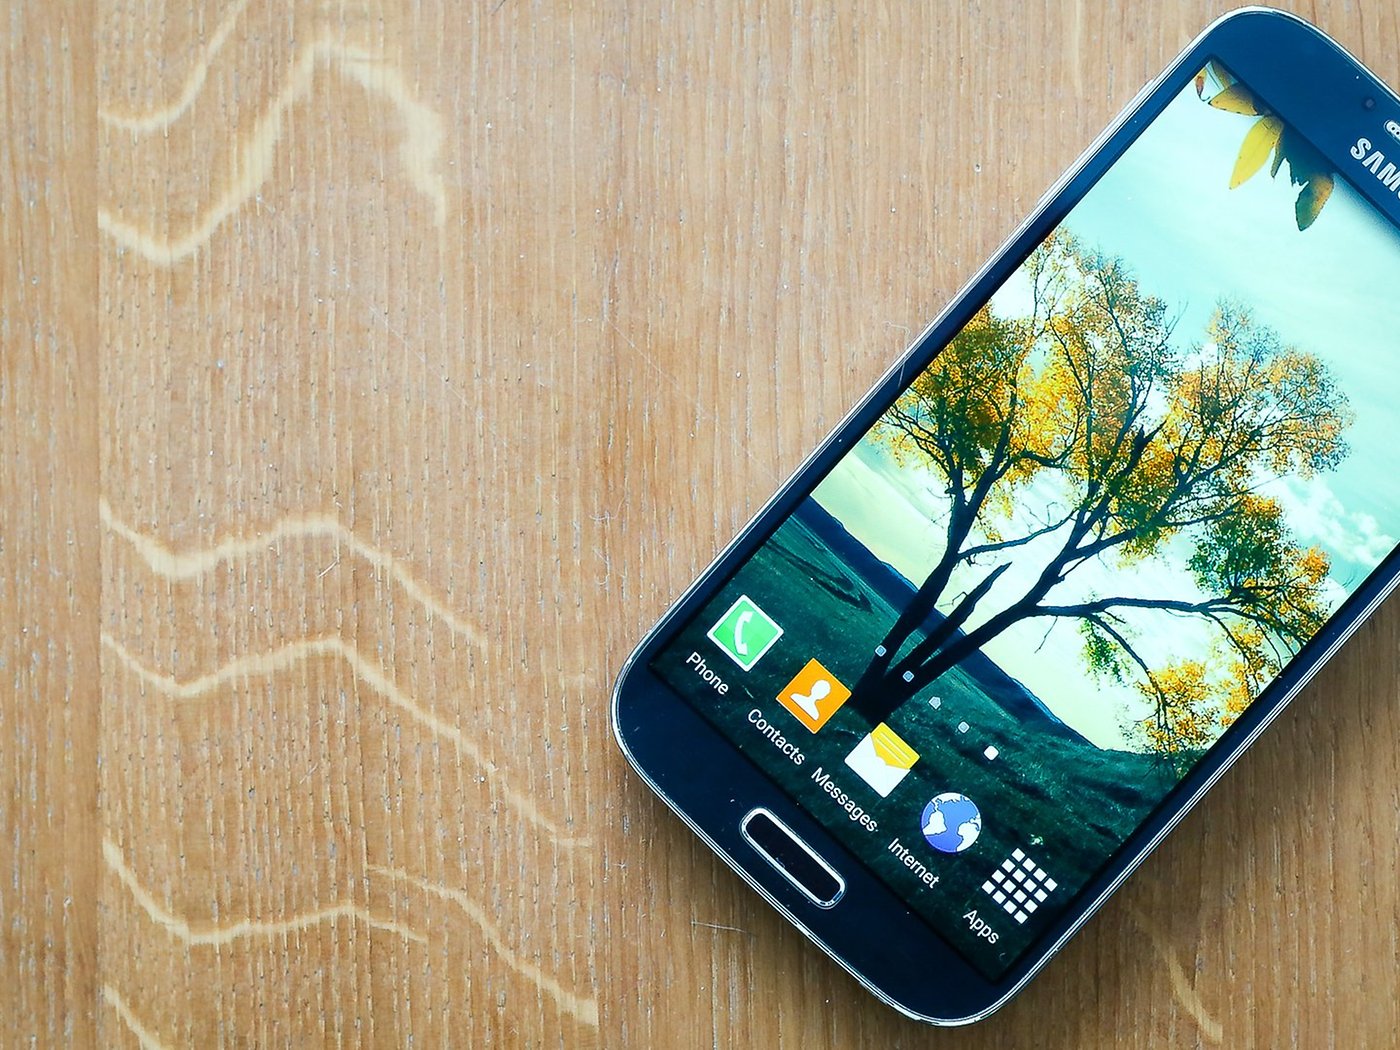 Go up and down wound internal How to free memory on the Galaxy S4 to get more storage space | NextPit